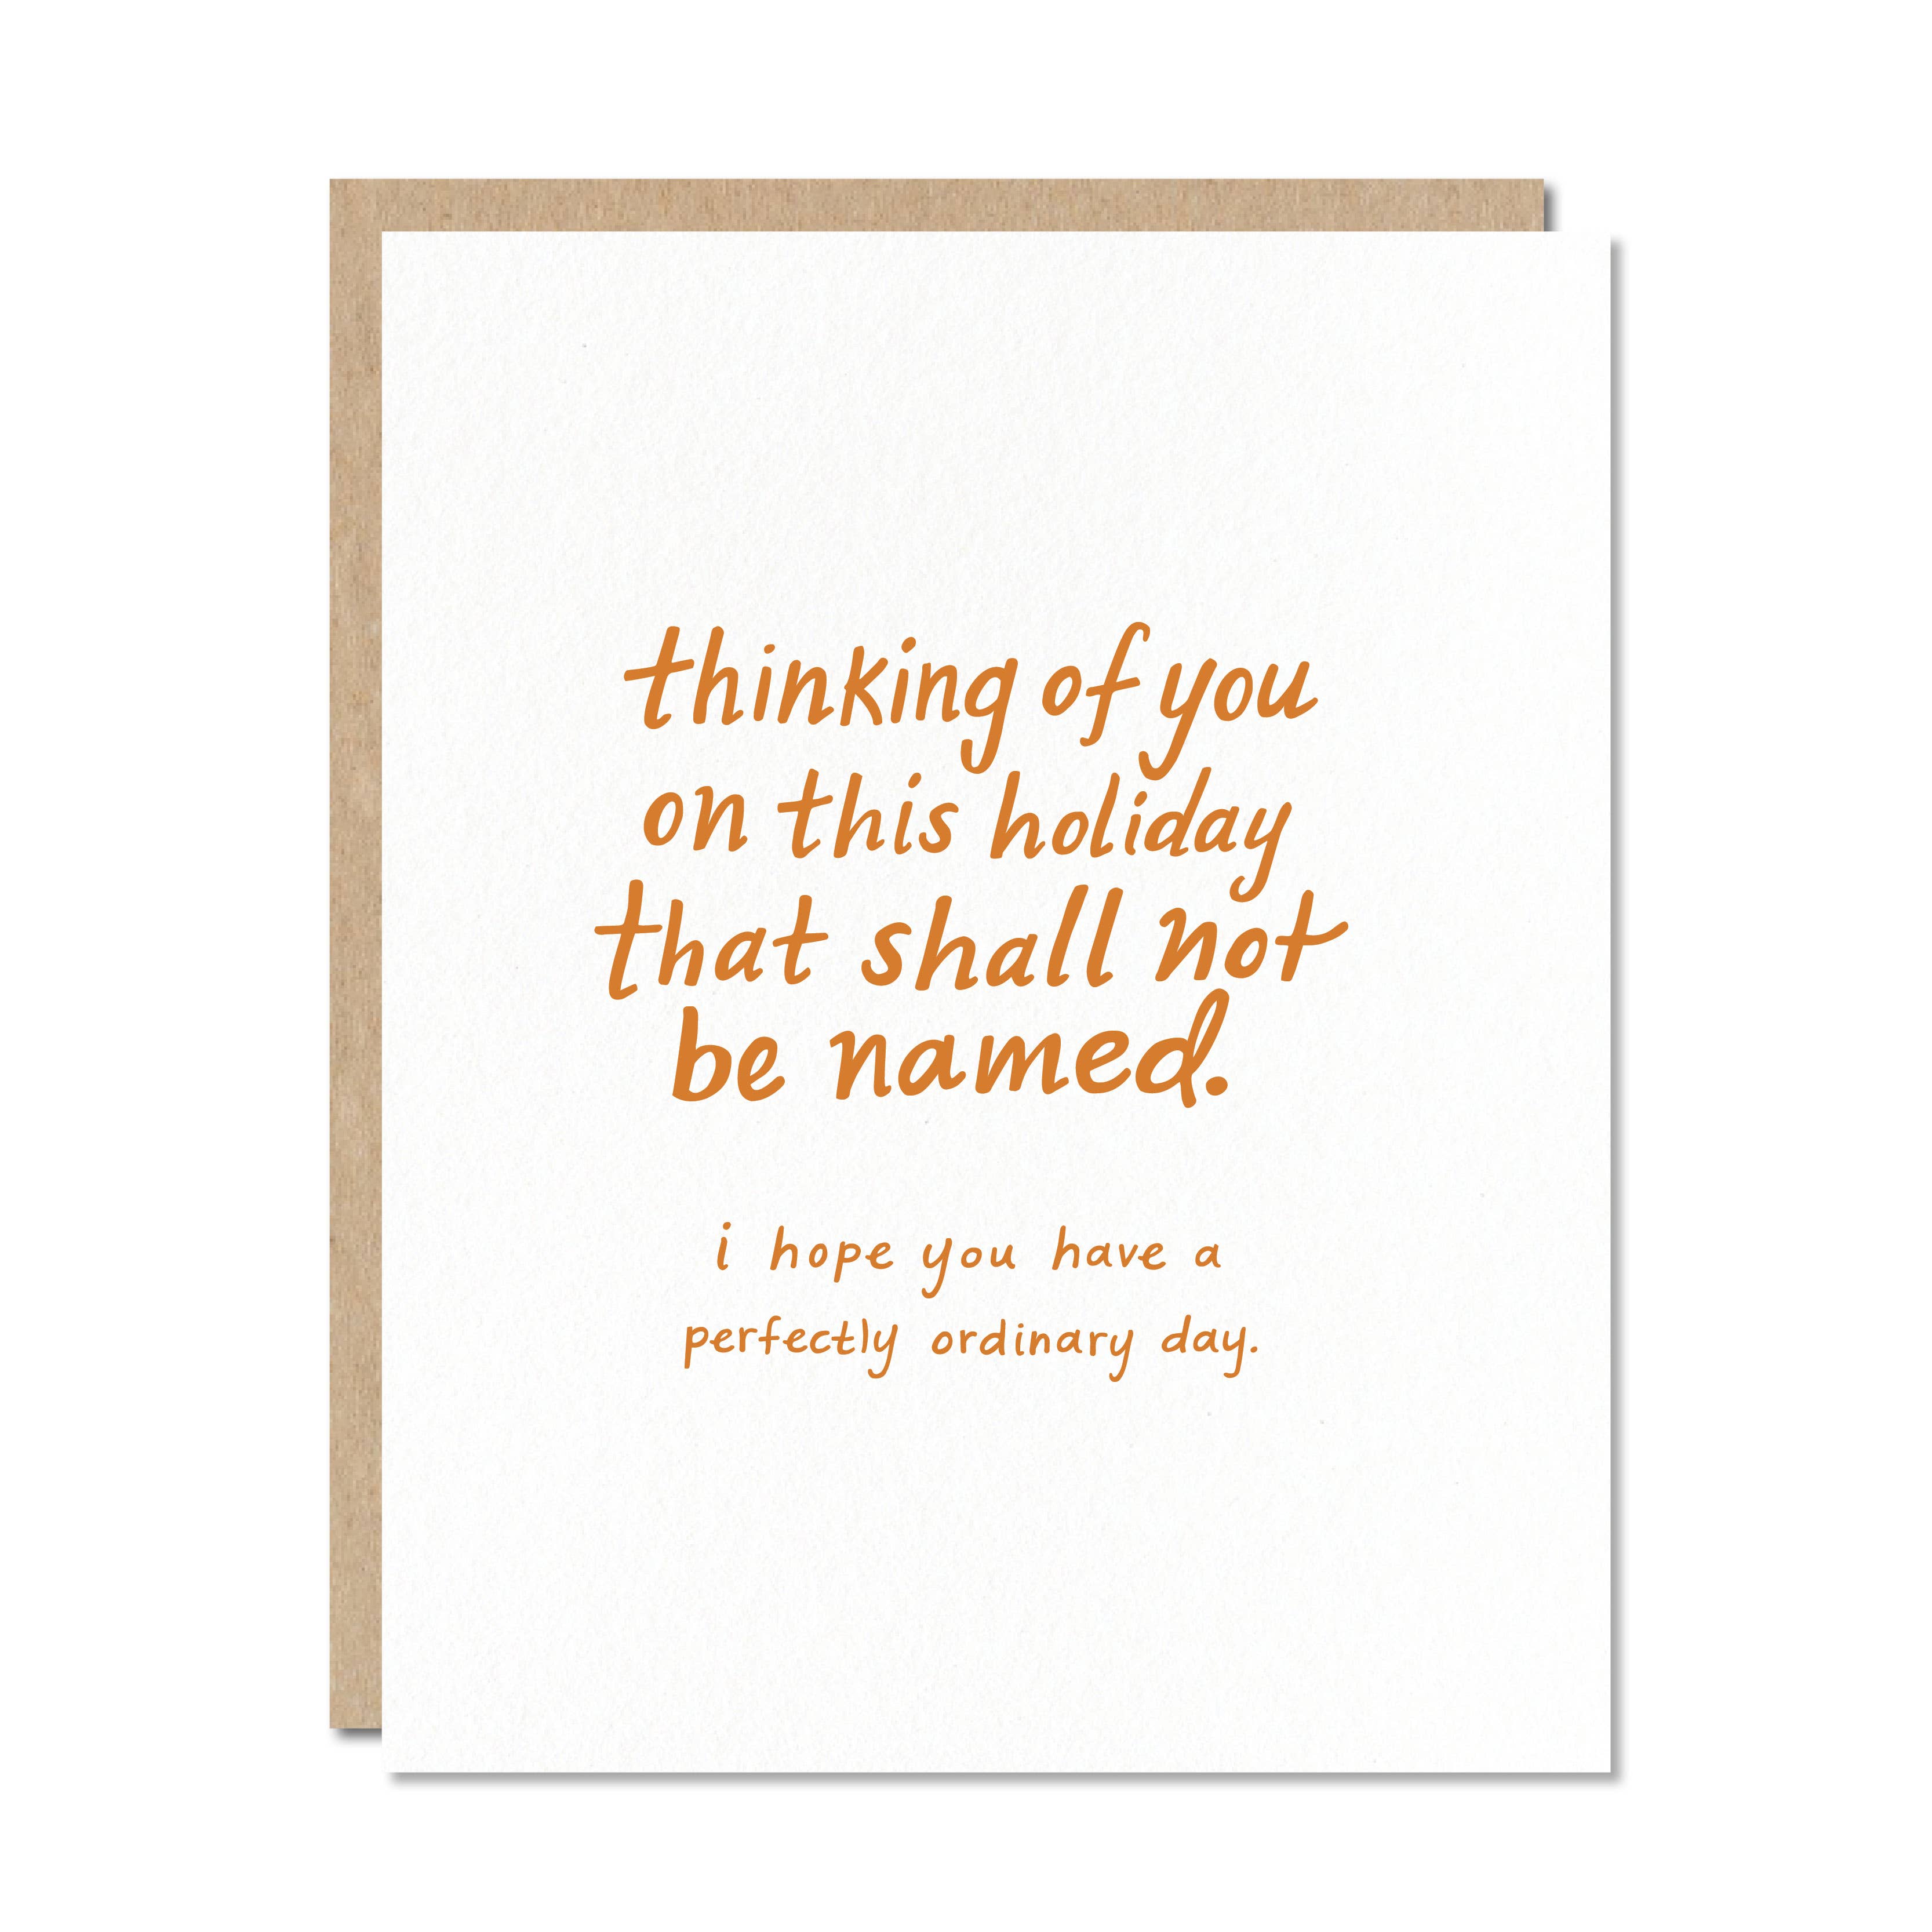 White card with orange text saying, "Thinking of You on This Holiday That Shall Not Be Named. I Hope You Have a Perfectly Ordinary Day".  A brown envelope is included.